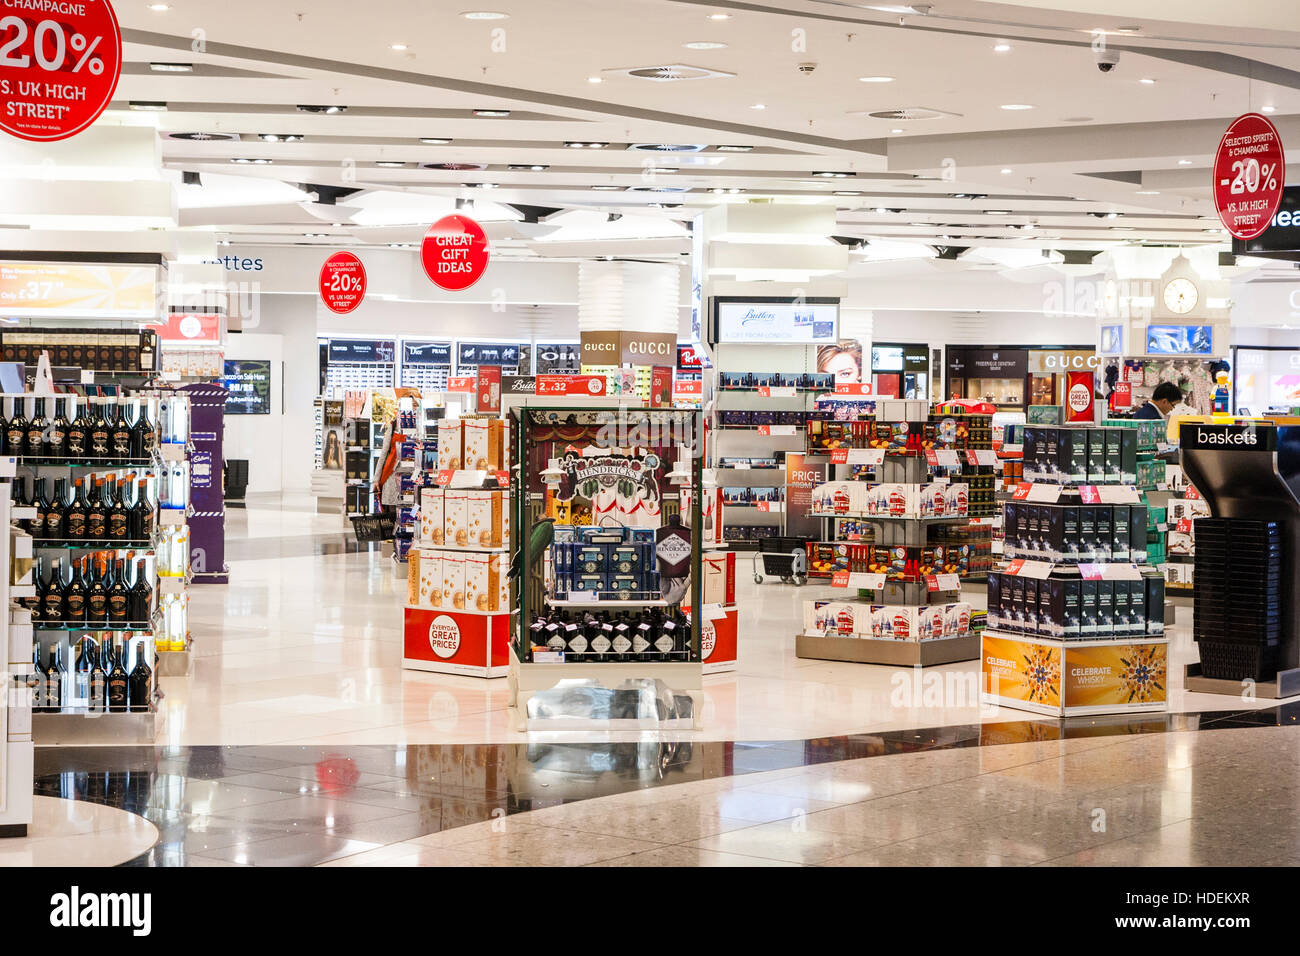 England, London, Heathrow airport, Terminal 2. Departure lounge interior. World Duty Free Shop, open with merchandise on display, signs hanging, 20%. Stock Photo